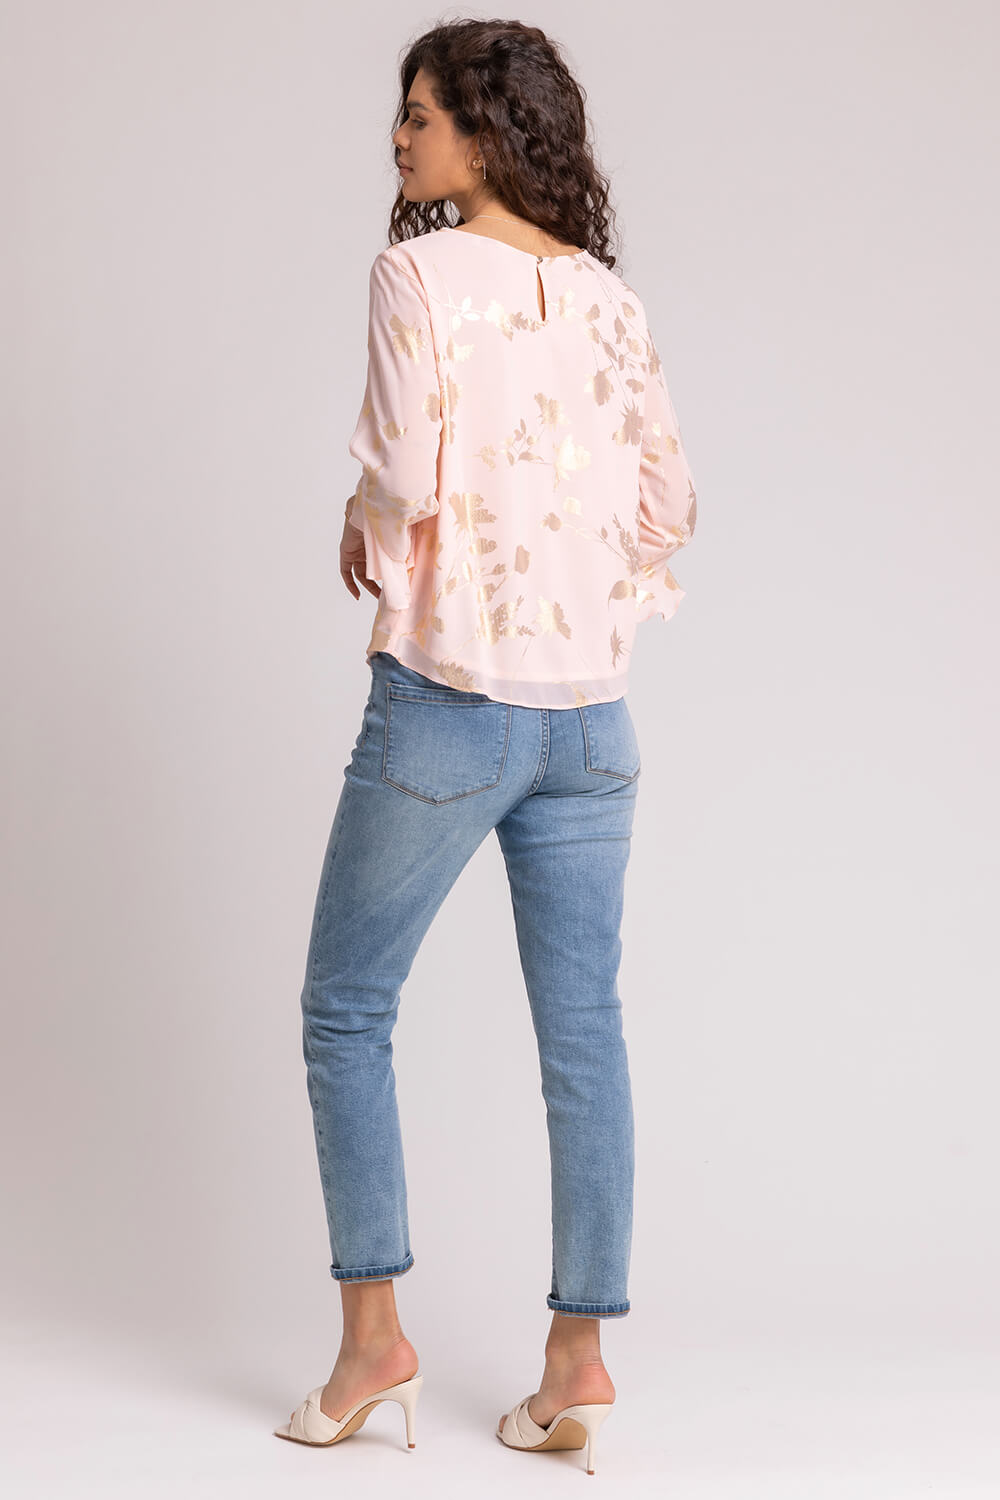 PINK Floral Foil Chiffon Flared Sleeve Top, Image 2 of 4